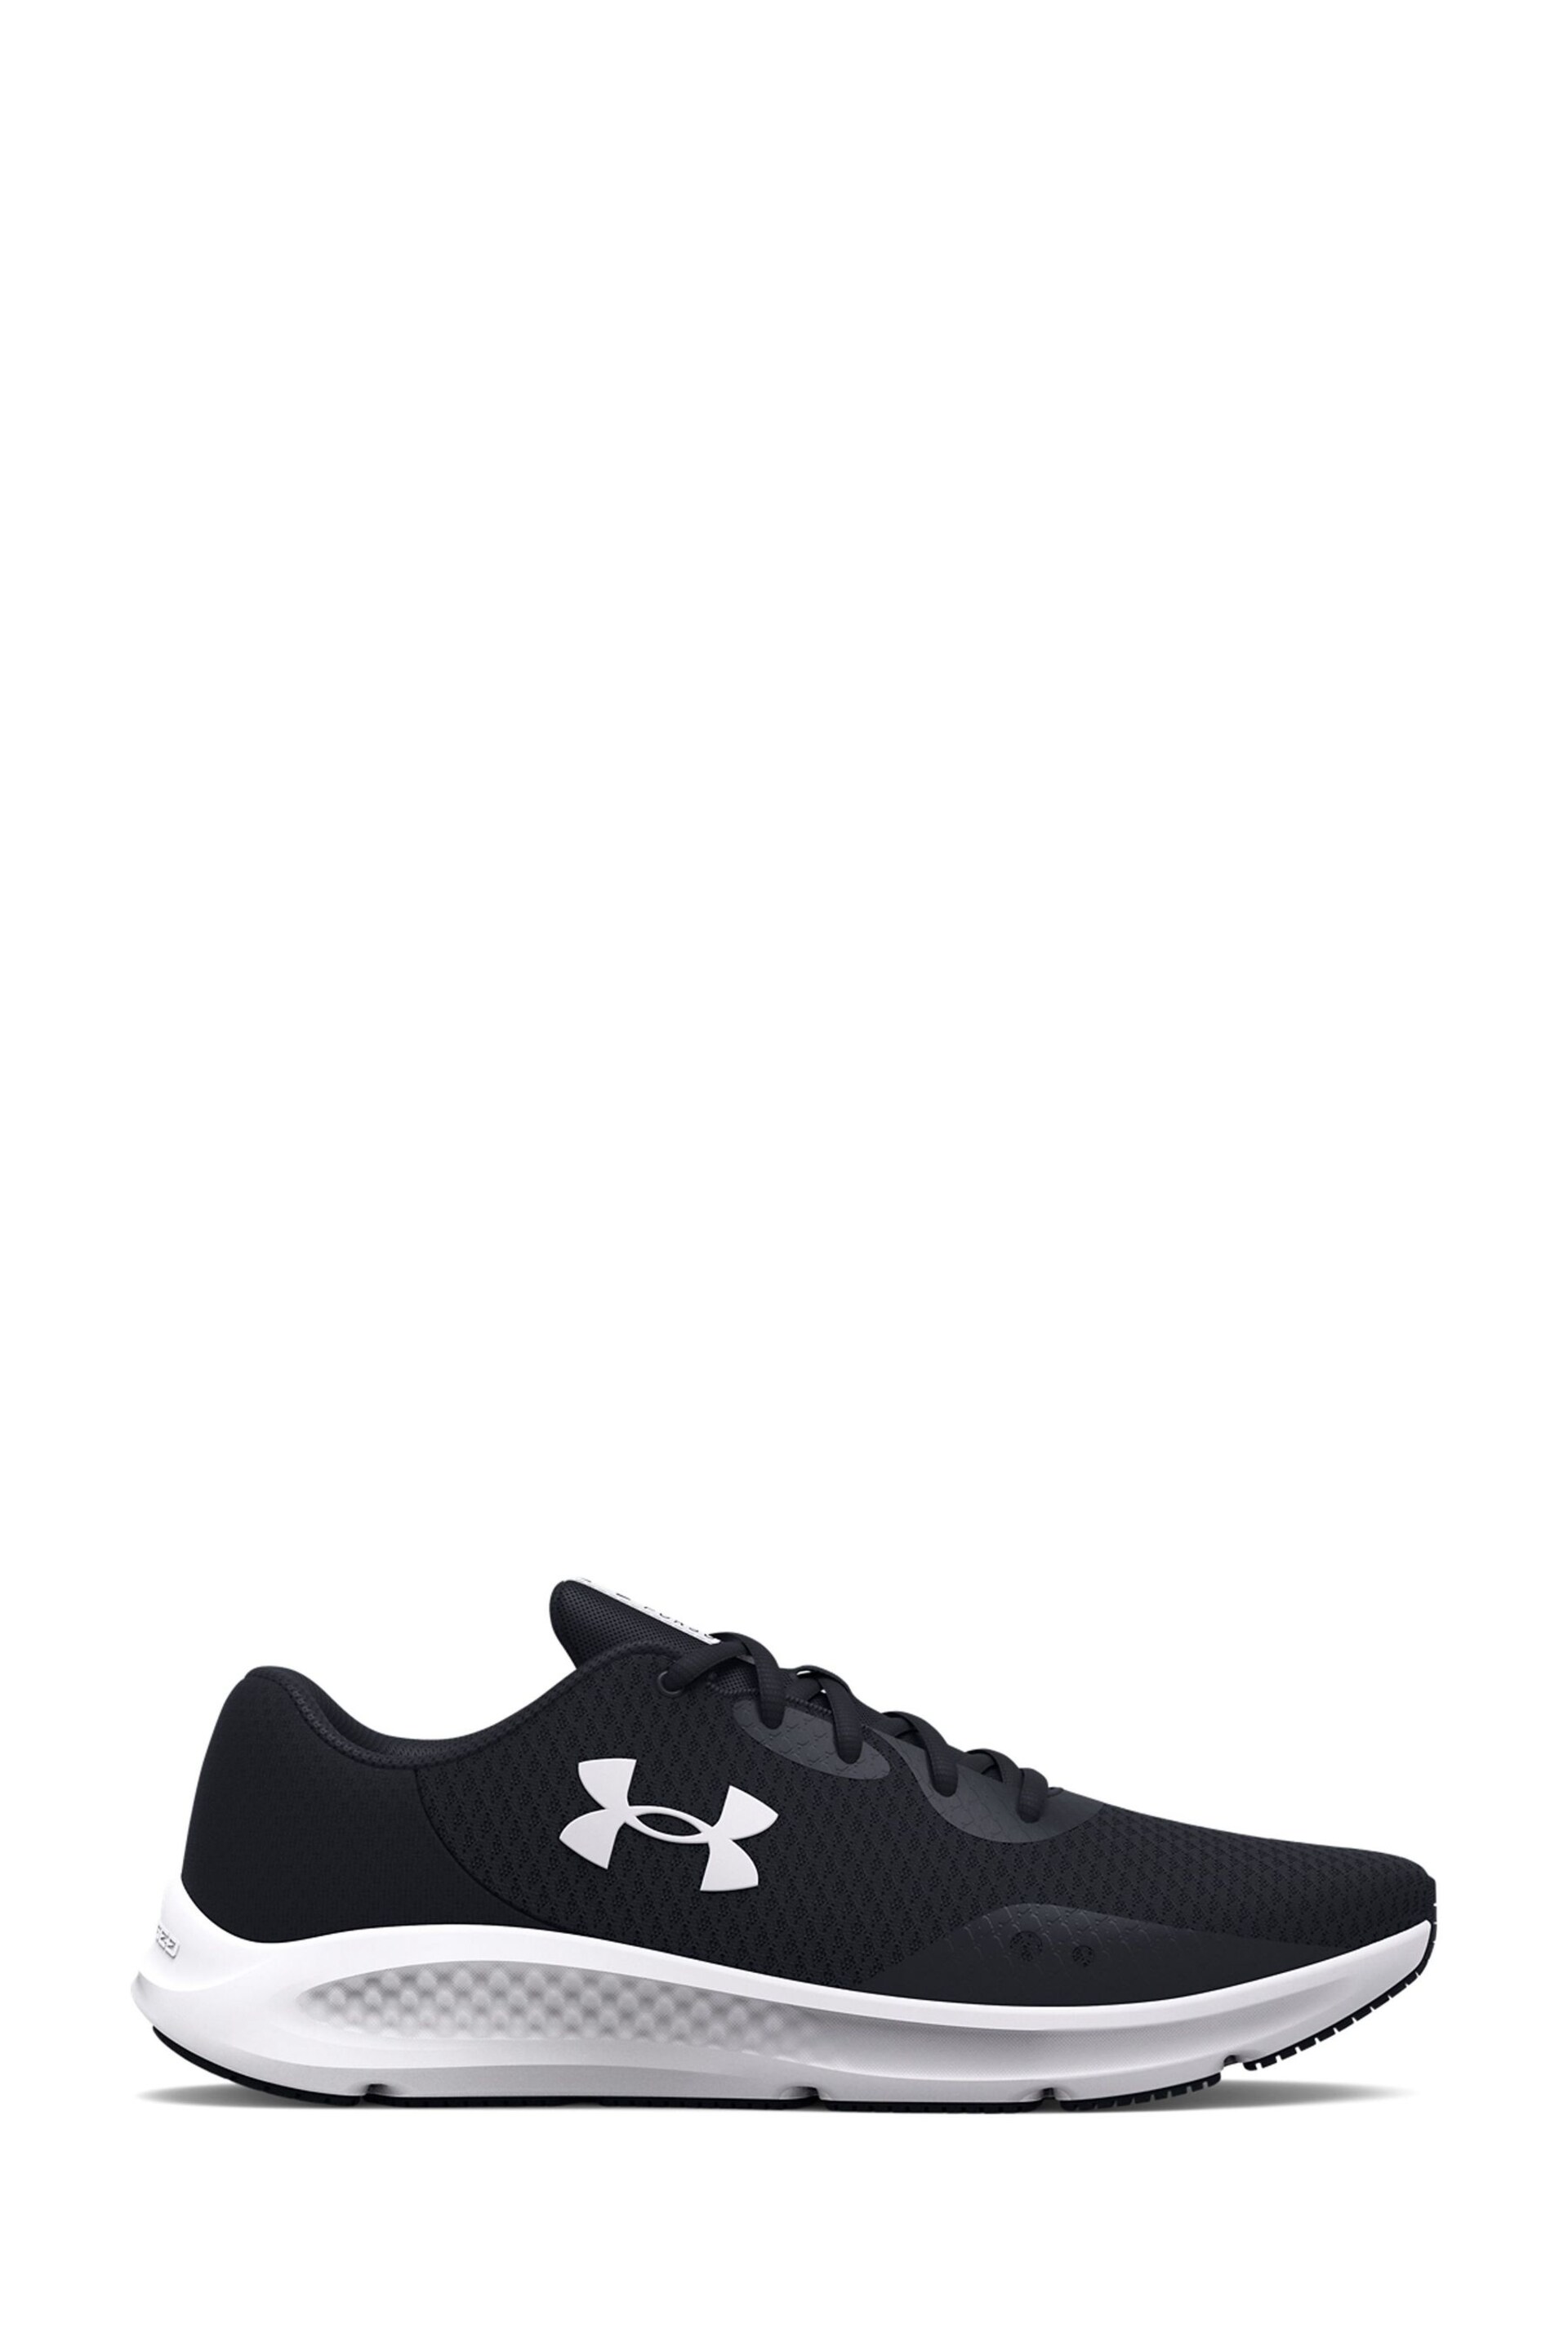 Under Armour Black/White Charged Pursuit 3 Trainers - Image 4 of 8